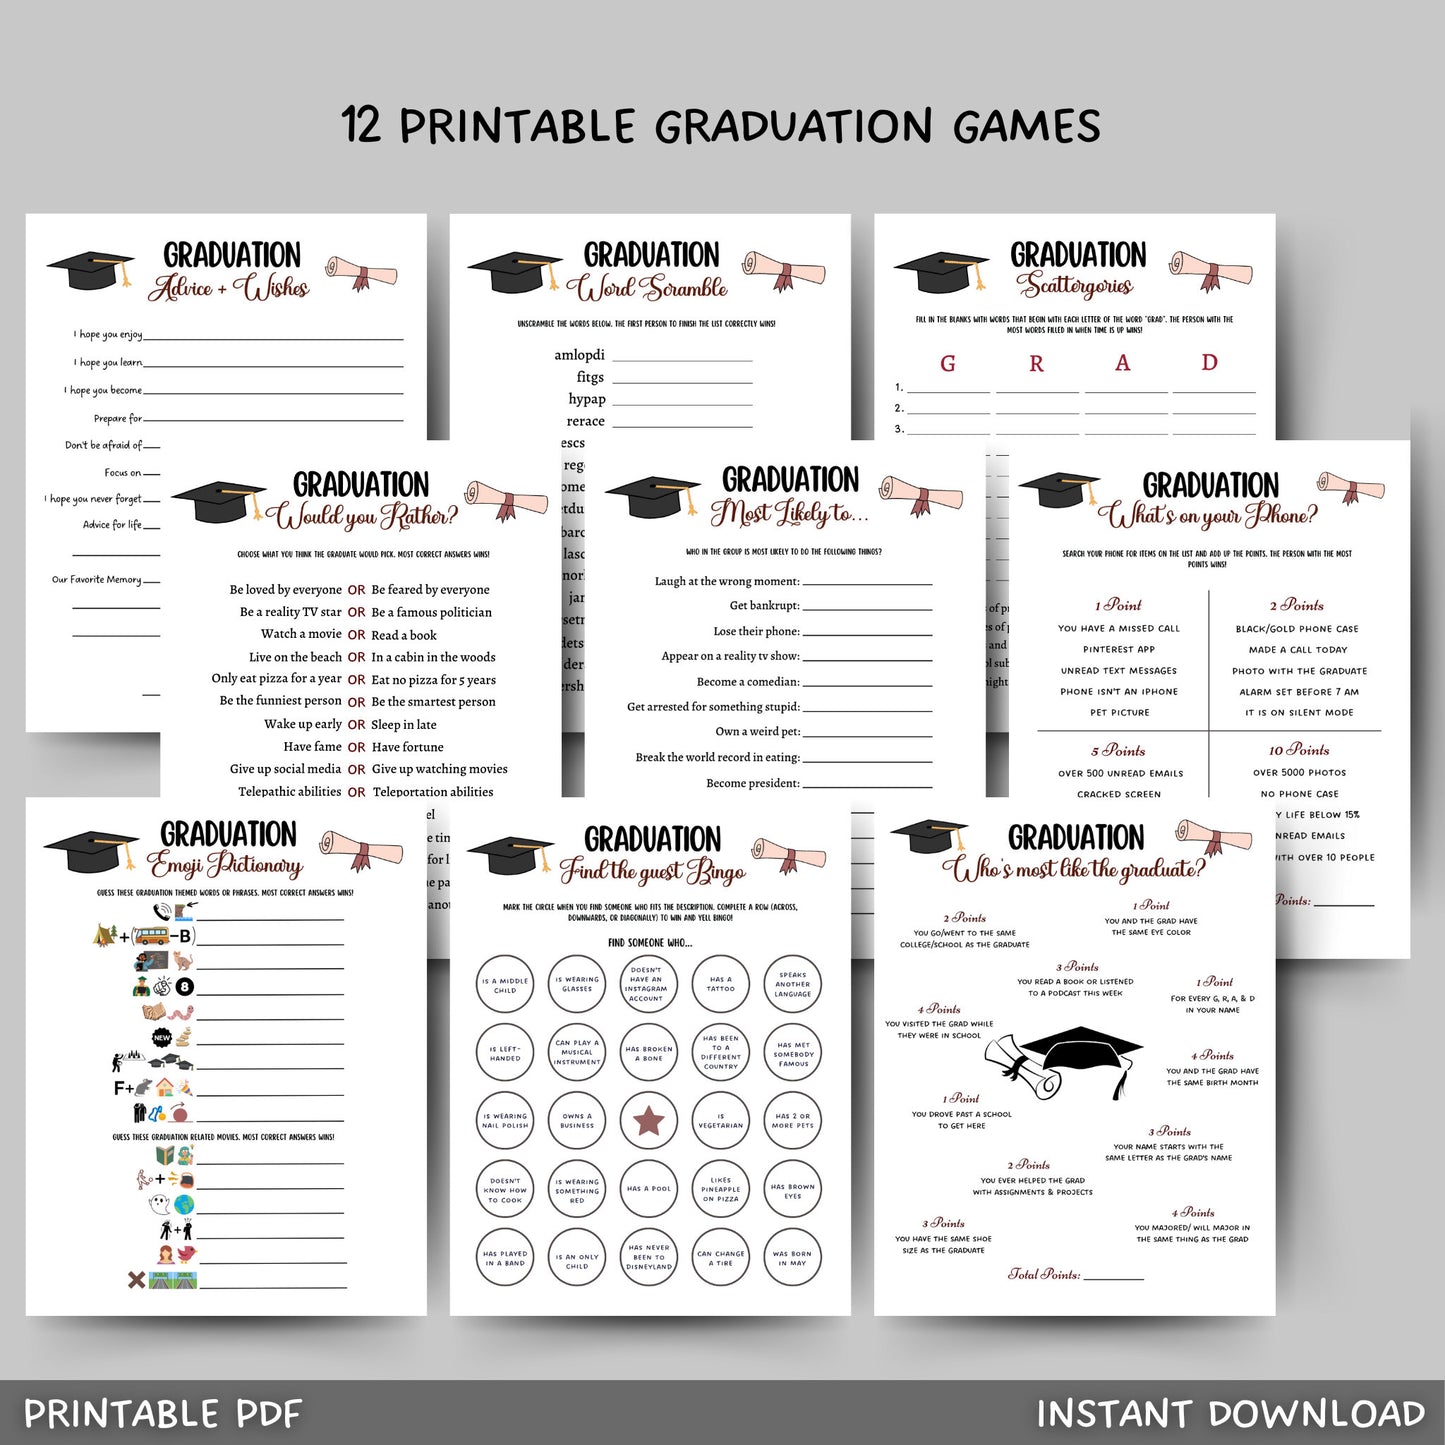 Purchase includes 12 printable graduation party games like emoji pictionary, who is most like the graduate, would you rather, advice and wishes for the grad, what&#39;s on your phone, scattergories, and much more! Simply, download, print, and use!